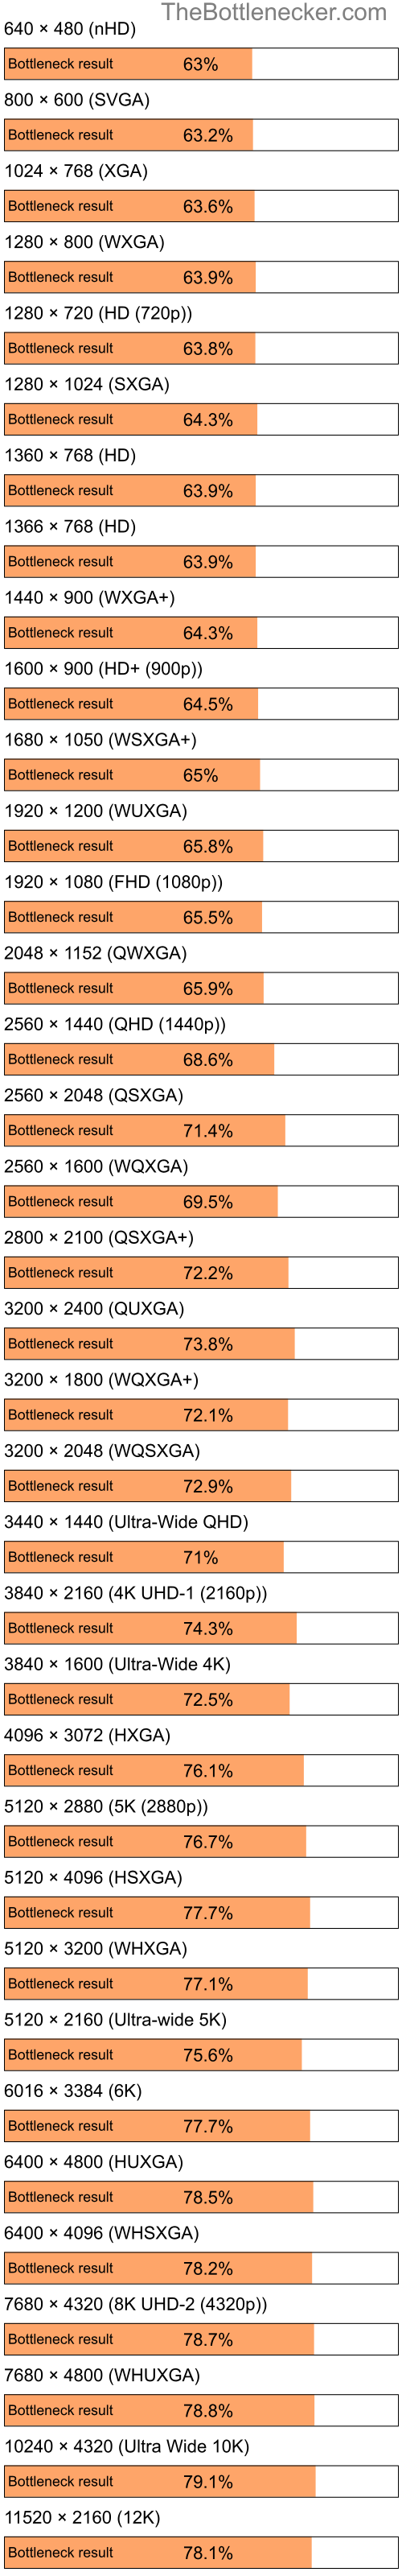 Bottleneck results by resolution for Intel Atom Z520 and NVIDIA GeForce 9300 GS in7 Days to Die